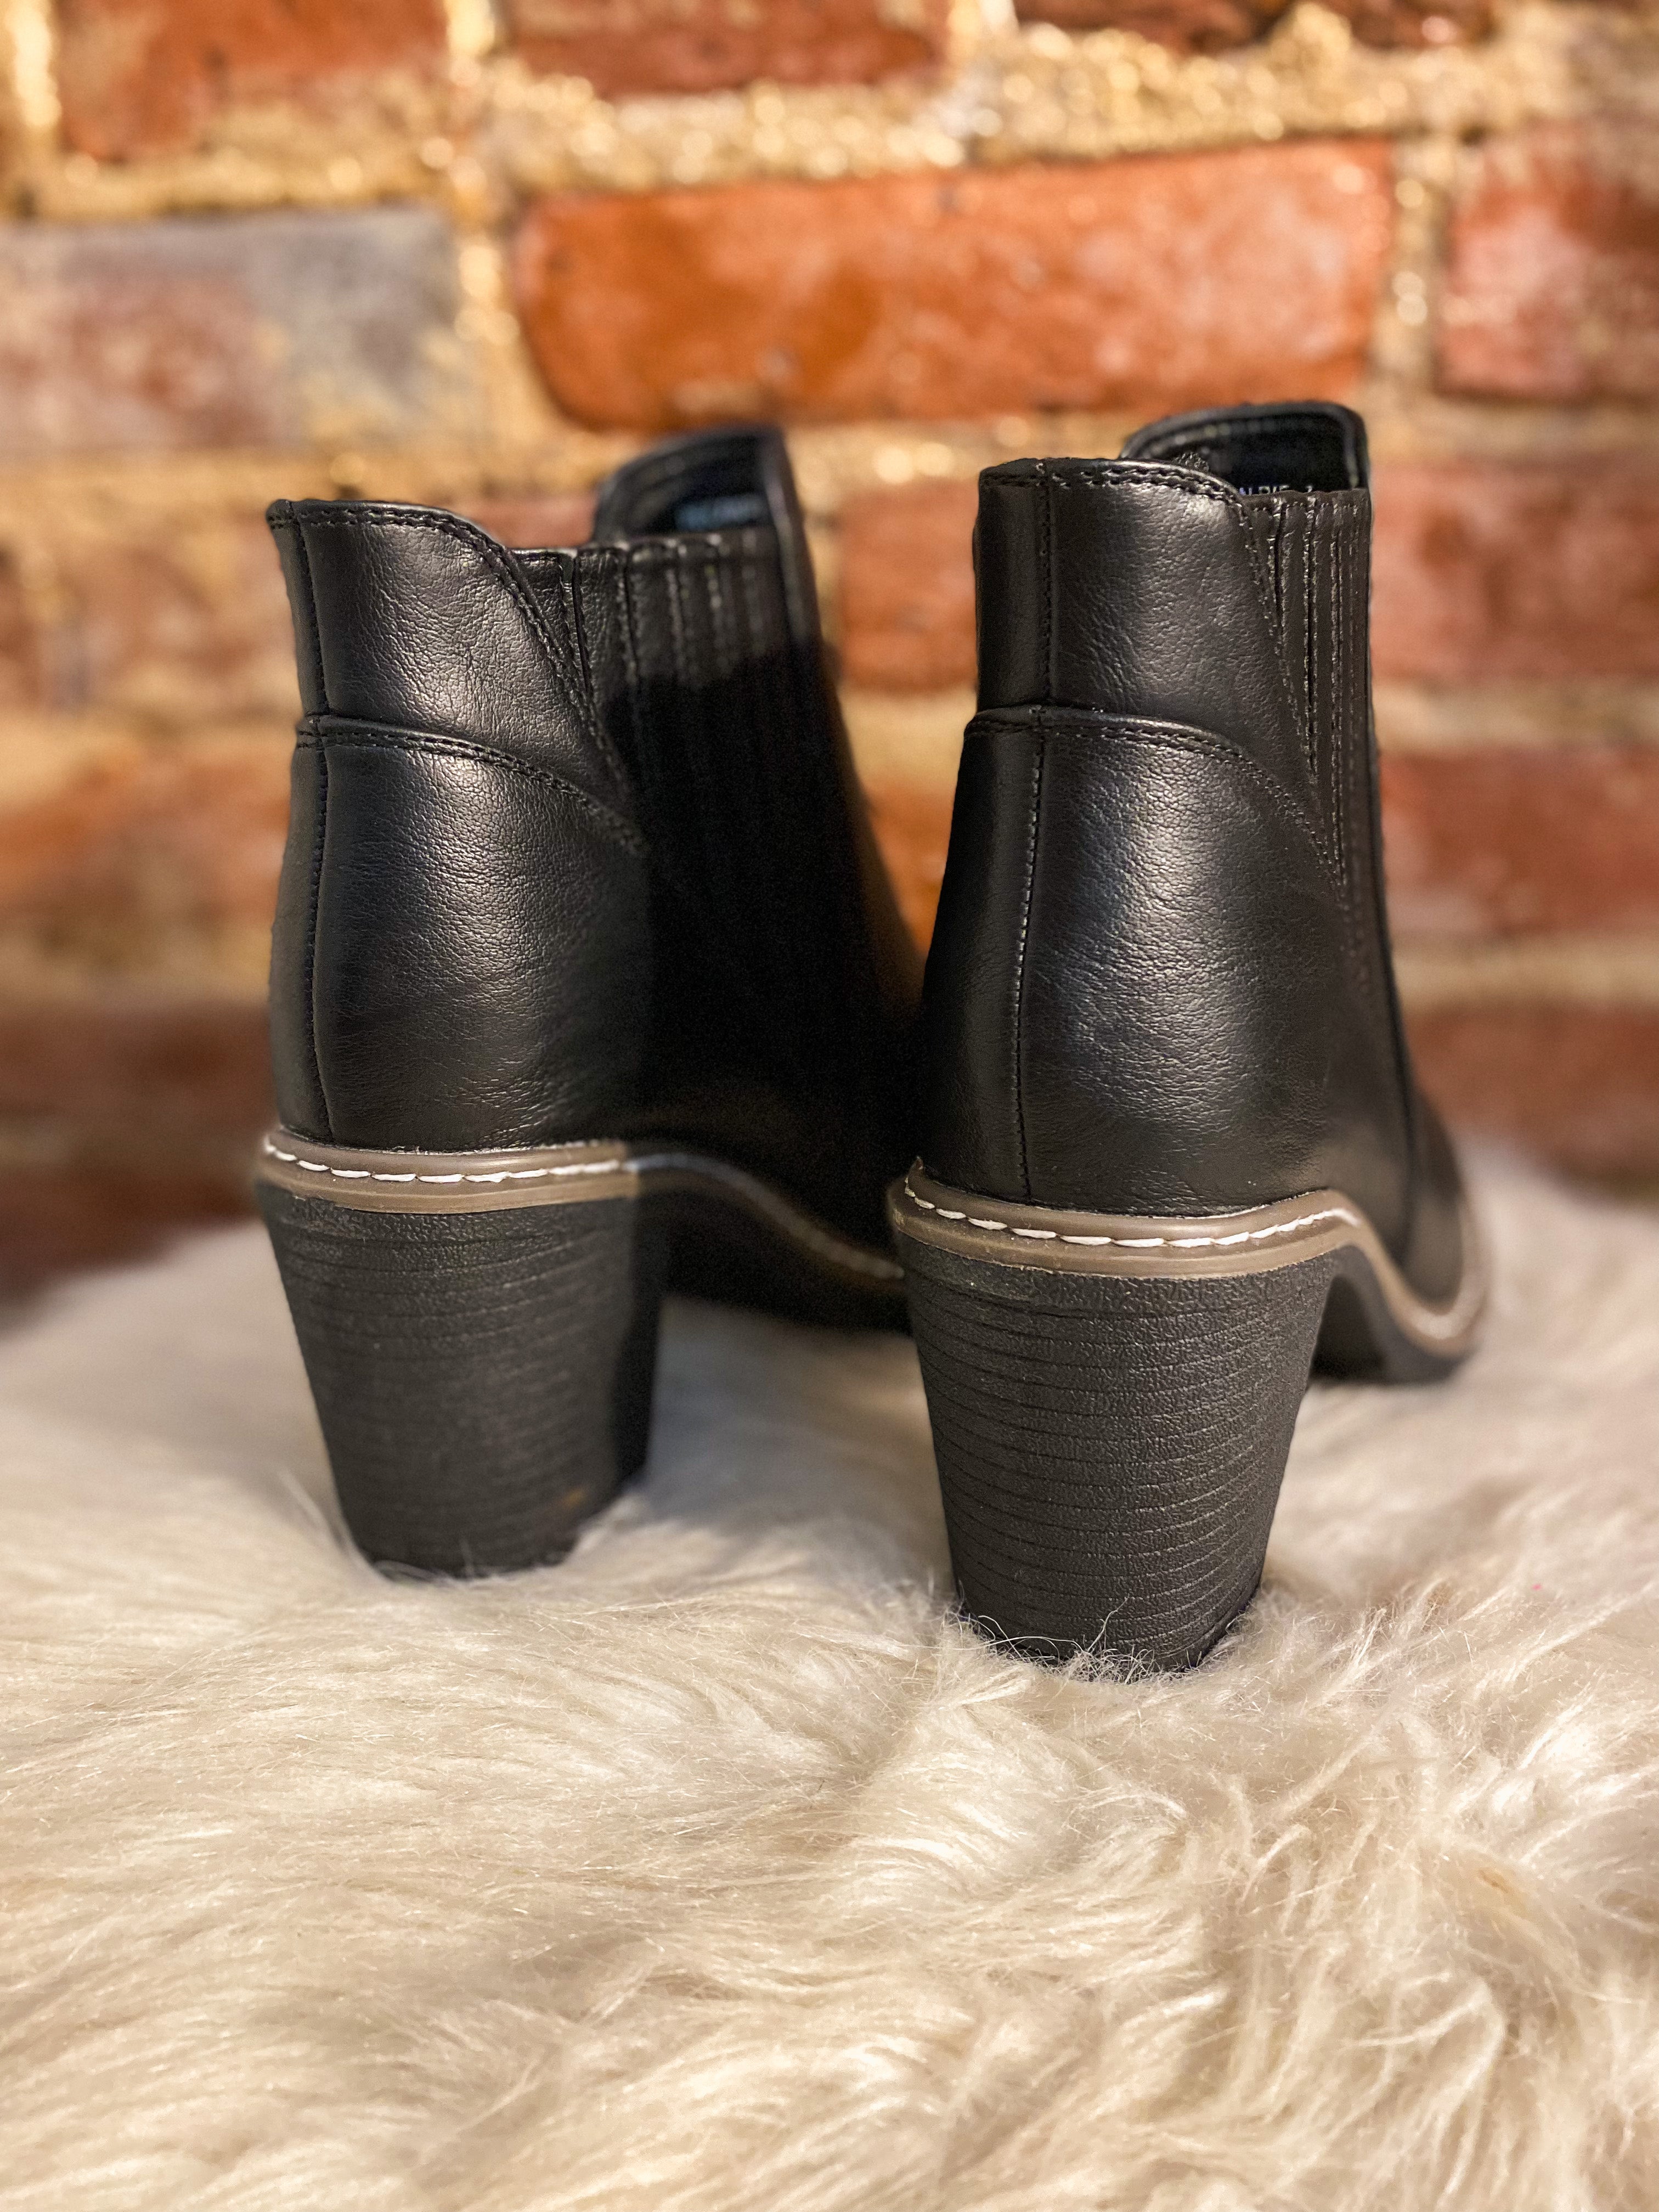 Boutique by Corkys Pecan Pie Black Ankle Booties